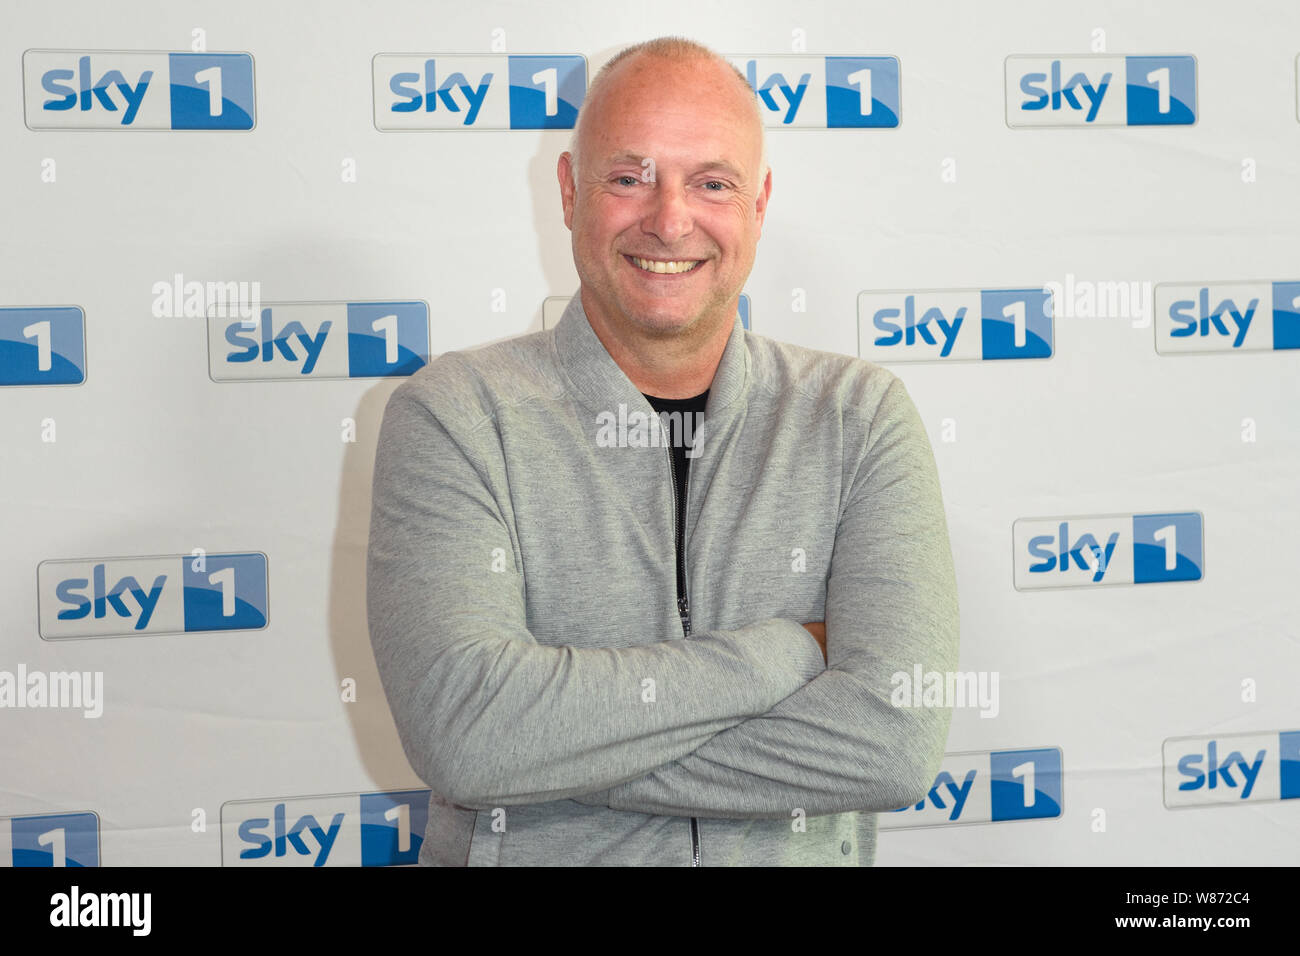 Frank Buschmann High Resolution Stock Photography and Images - Alamy